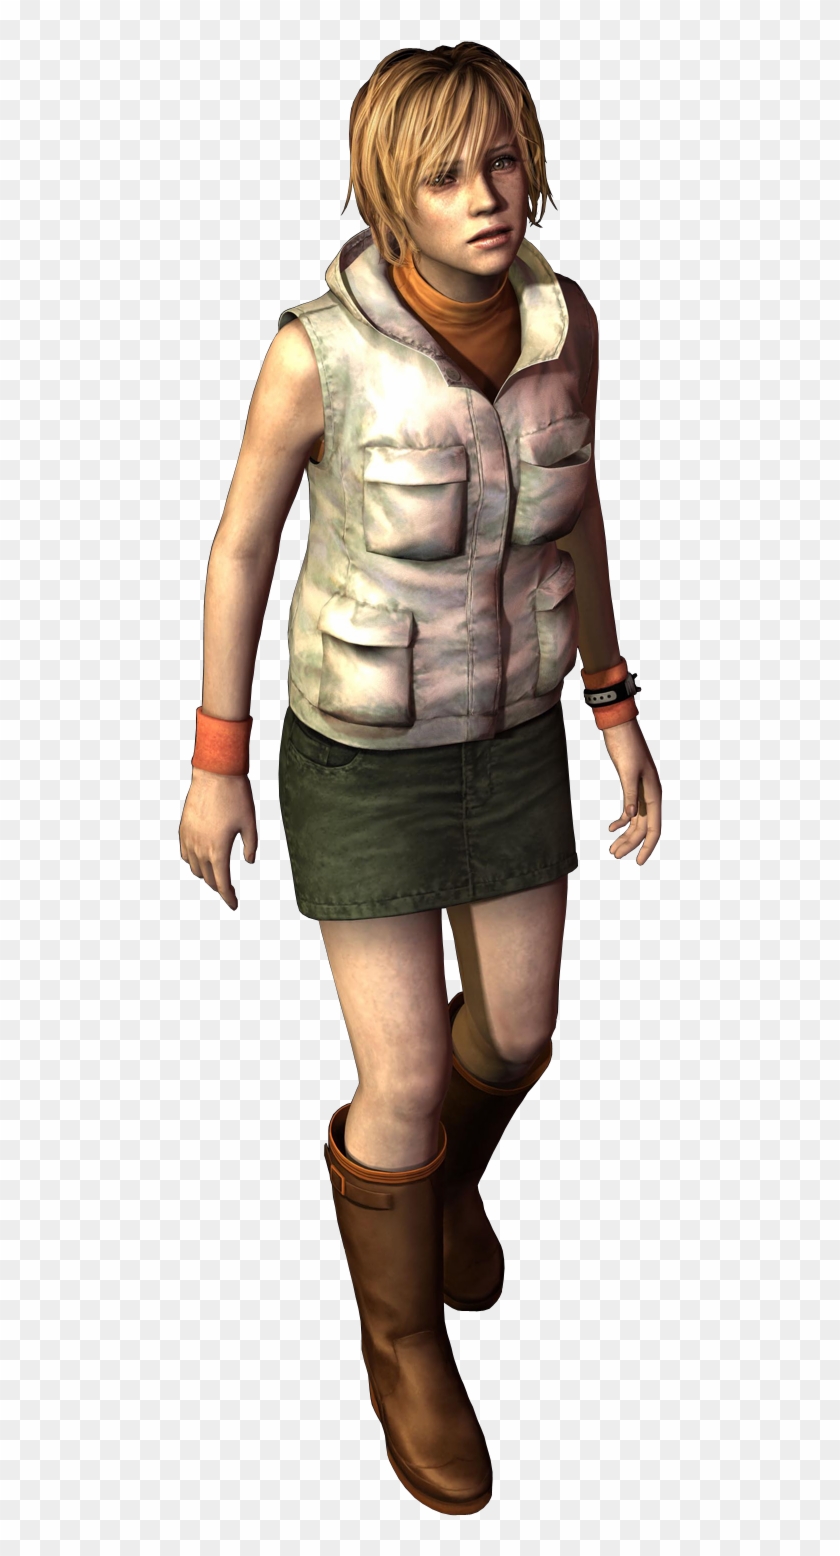 Silent Hill Render Download - Silent Hill 3 Png Clipart